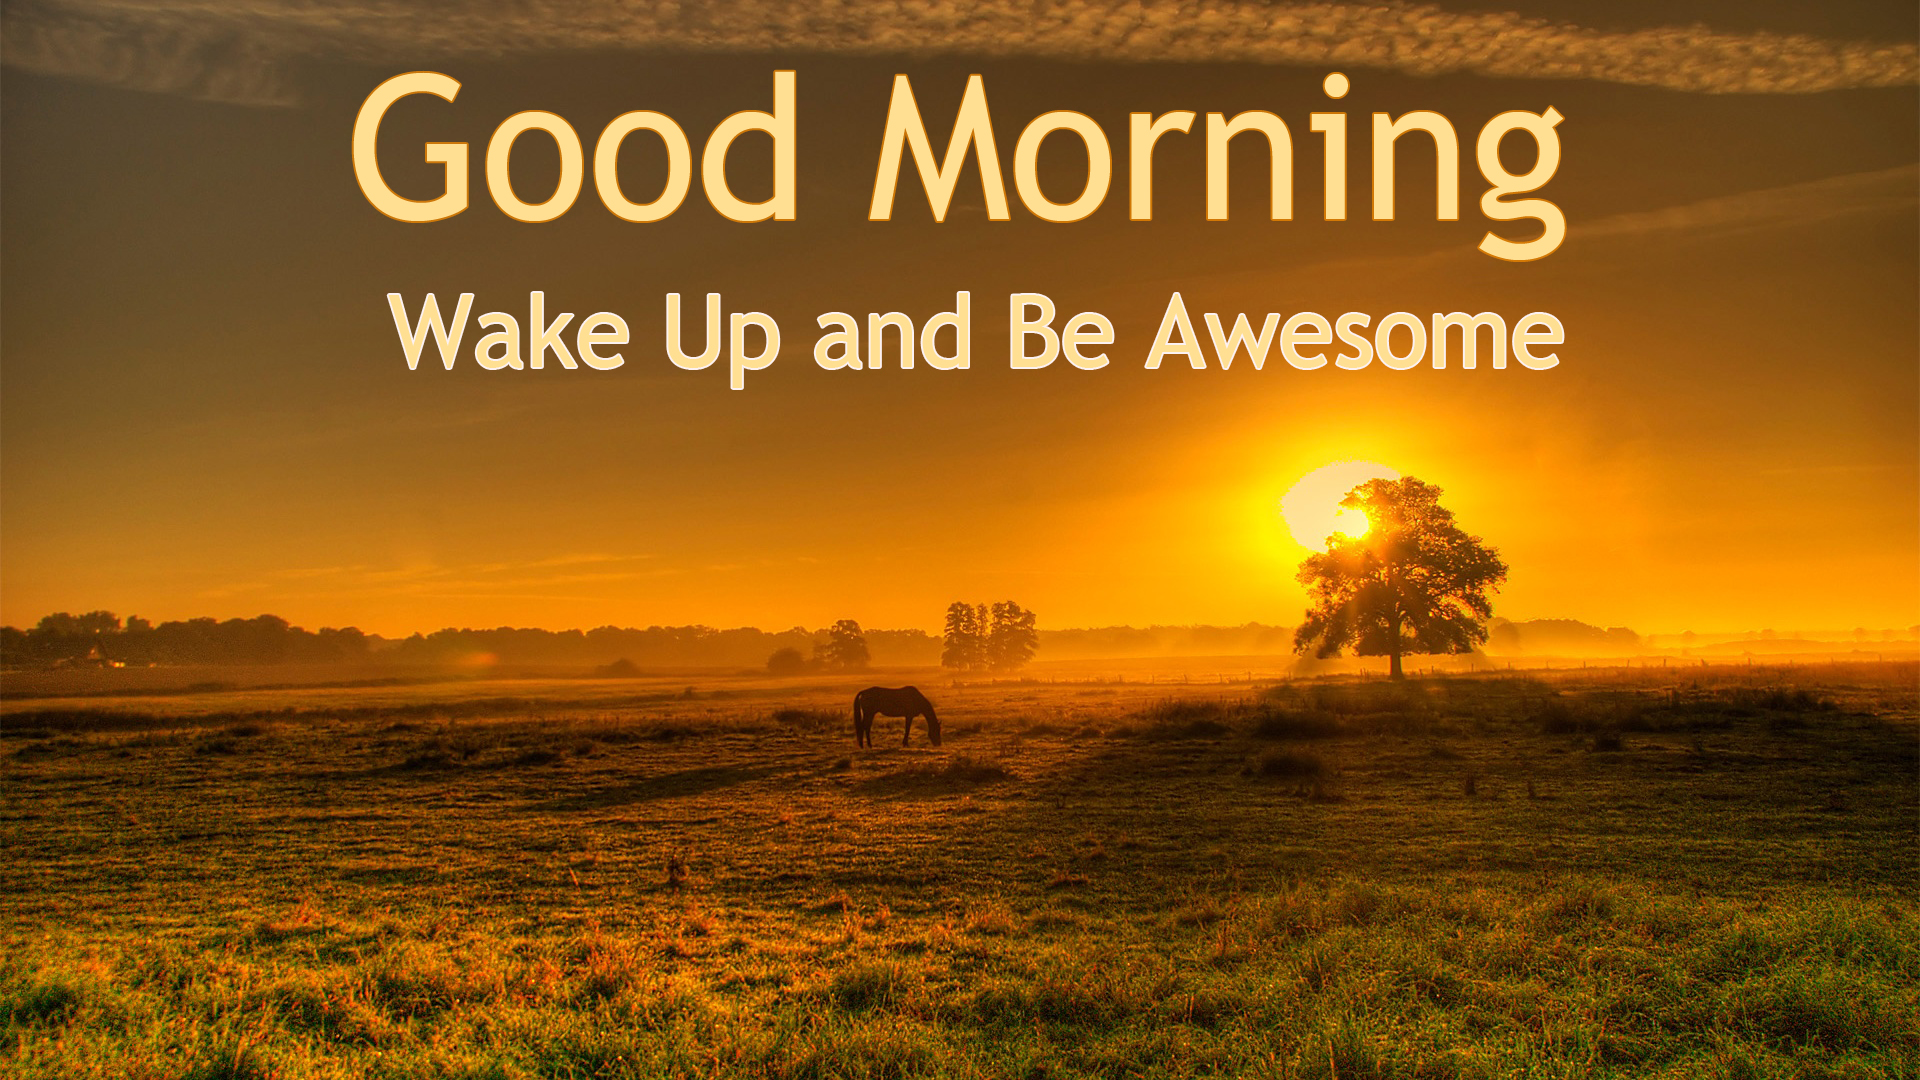 Good Morning Images With Inspirational Quotes HD